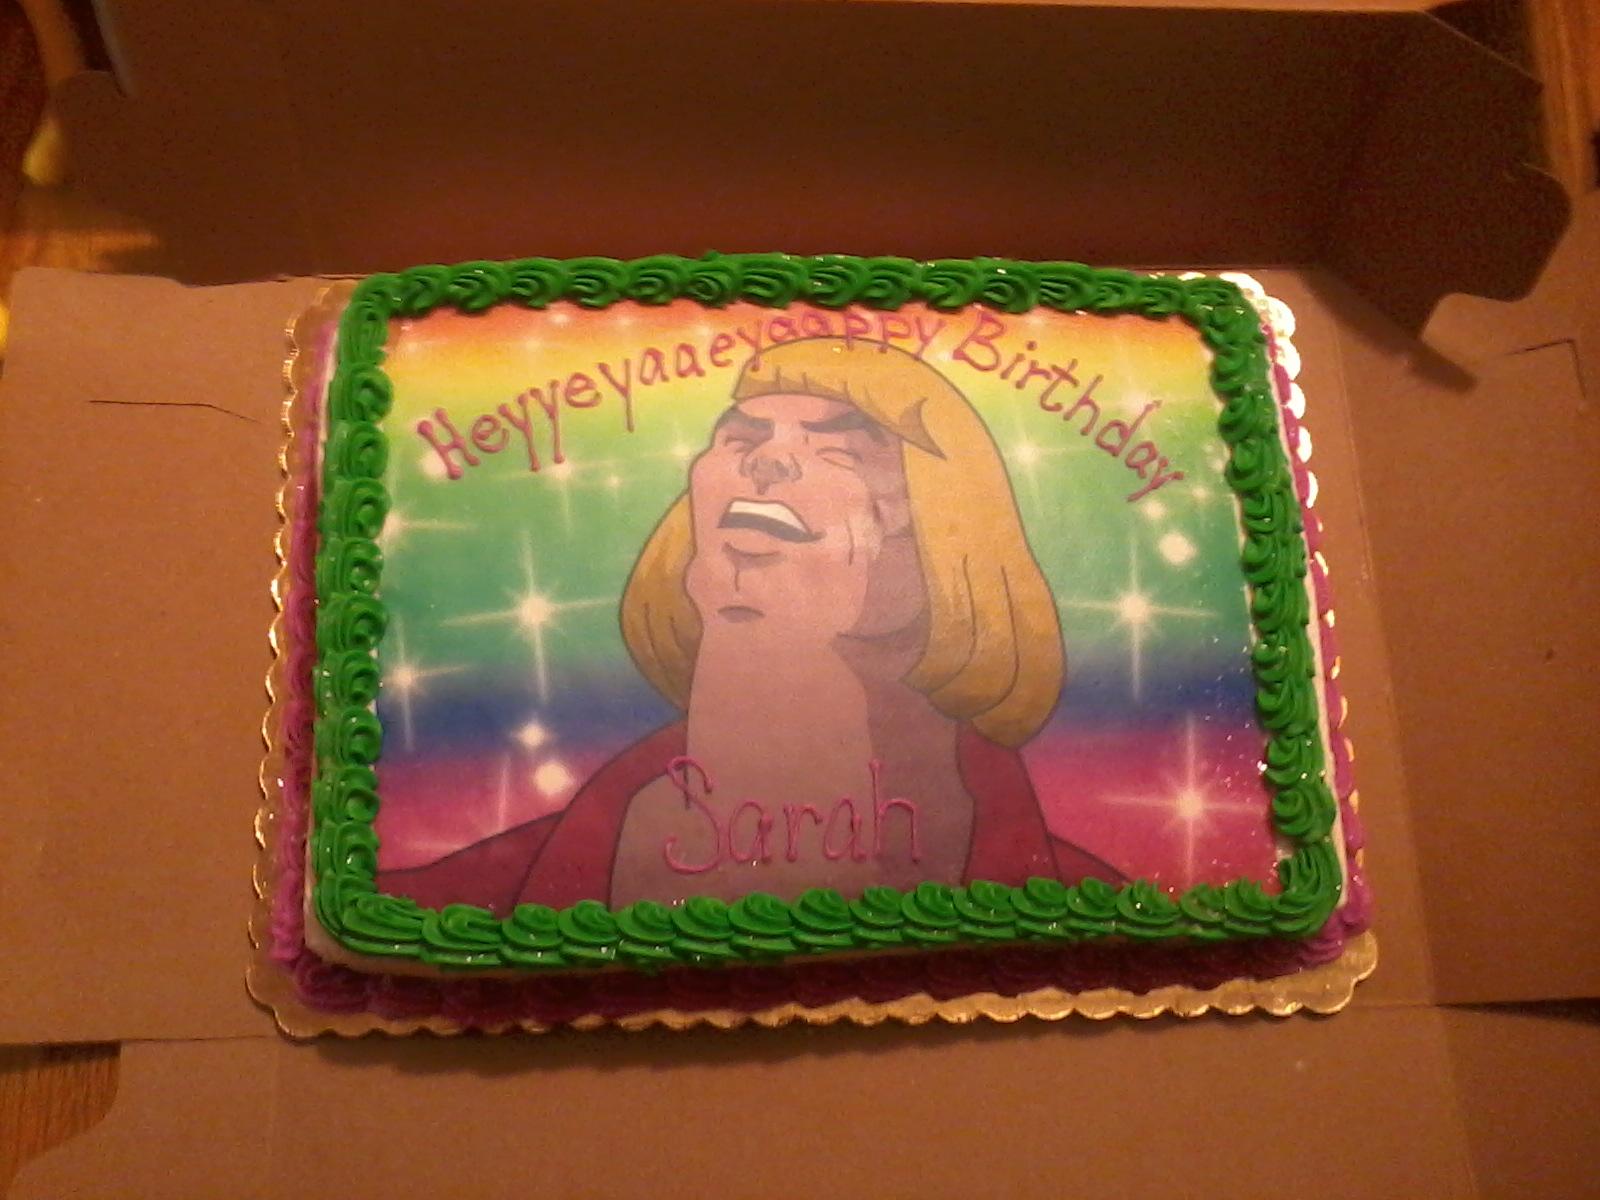 Someone sent my friend a birthday cake. I laughed so hard